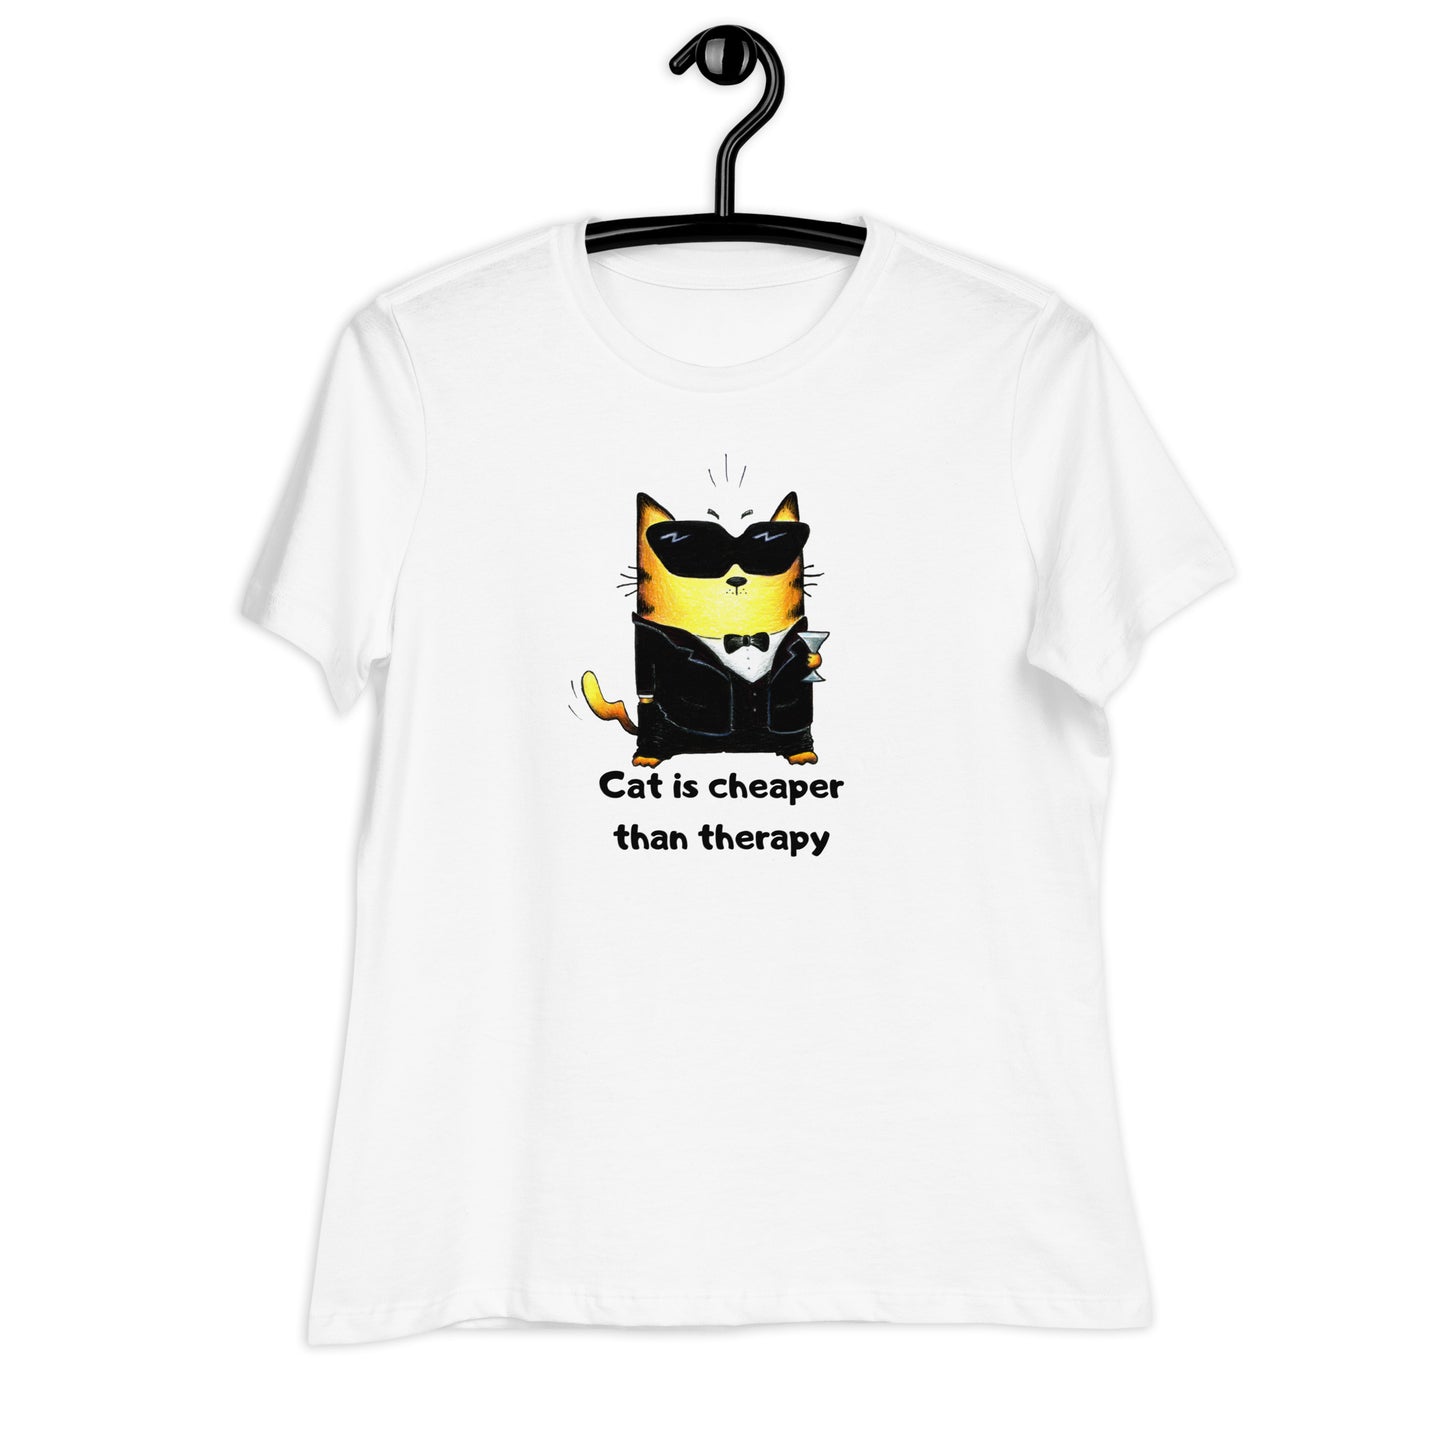 Ladies T-Shirt "Therapy Cat"